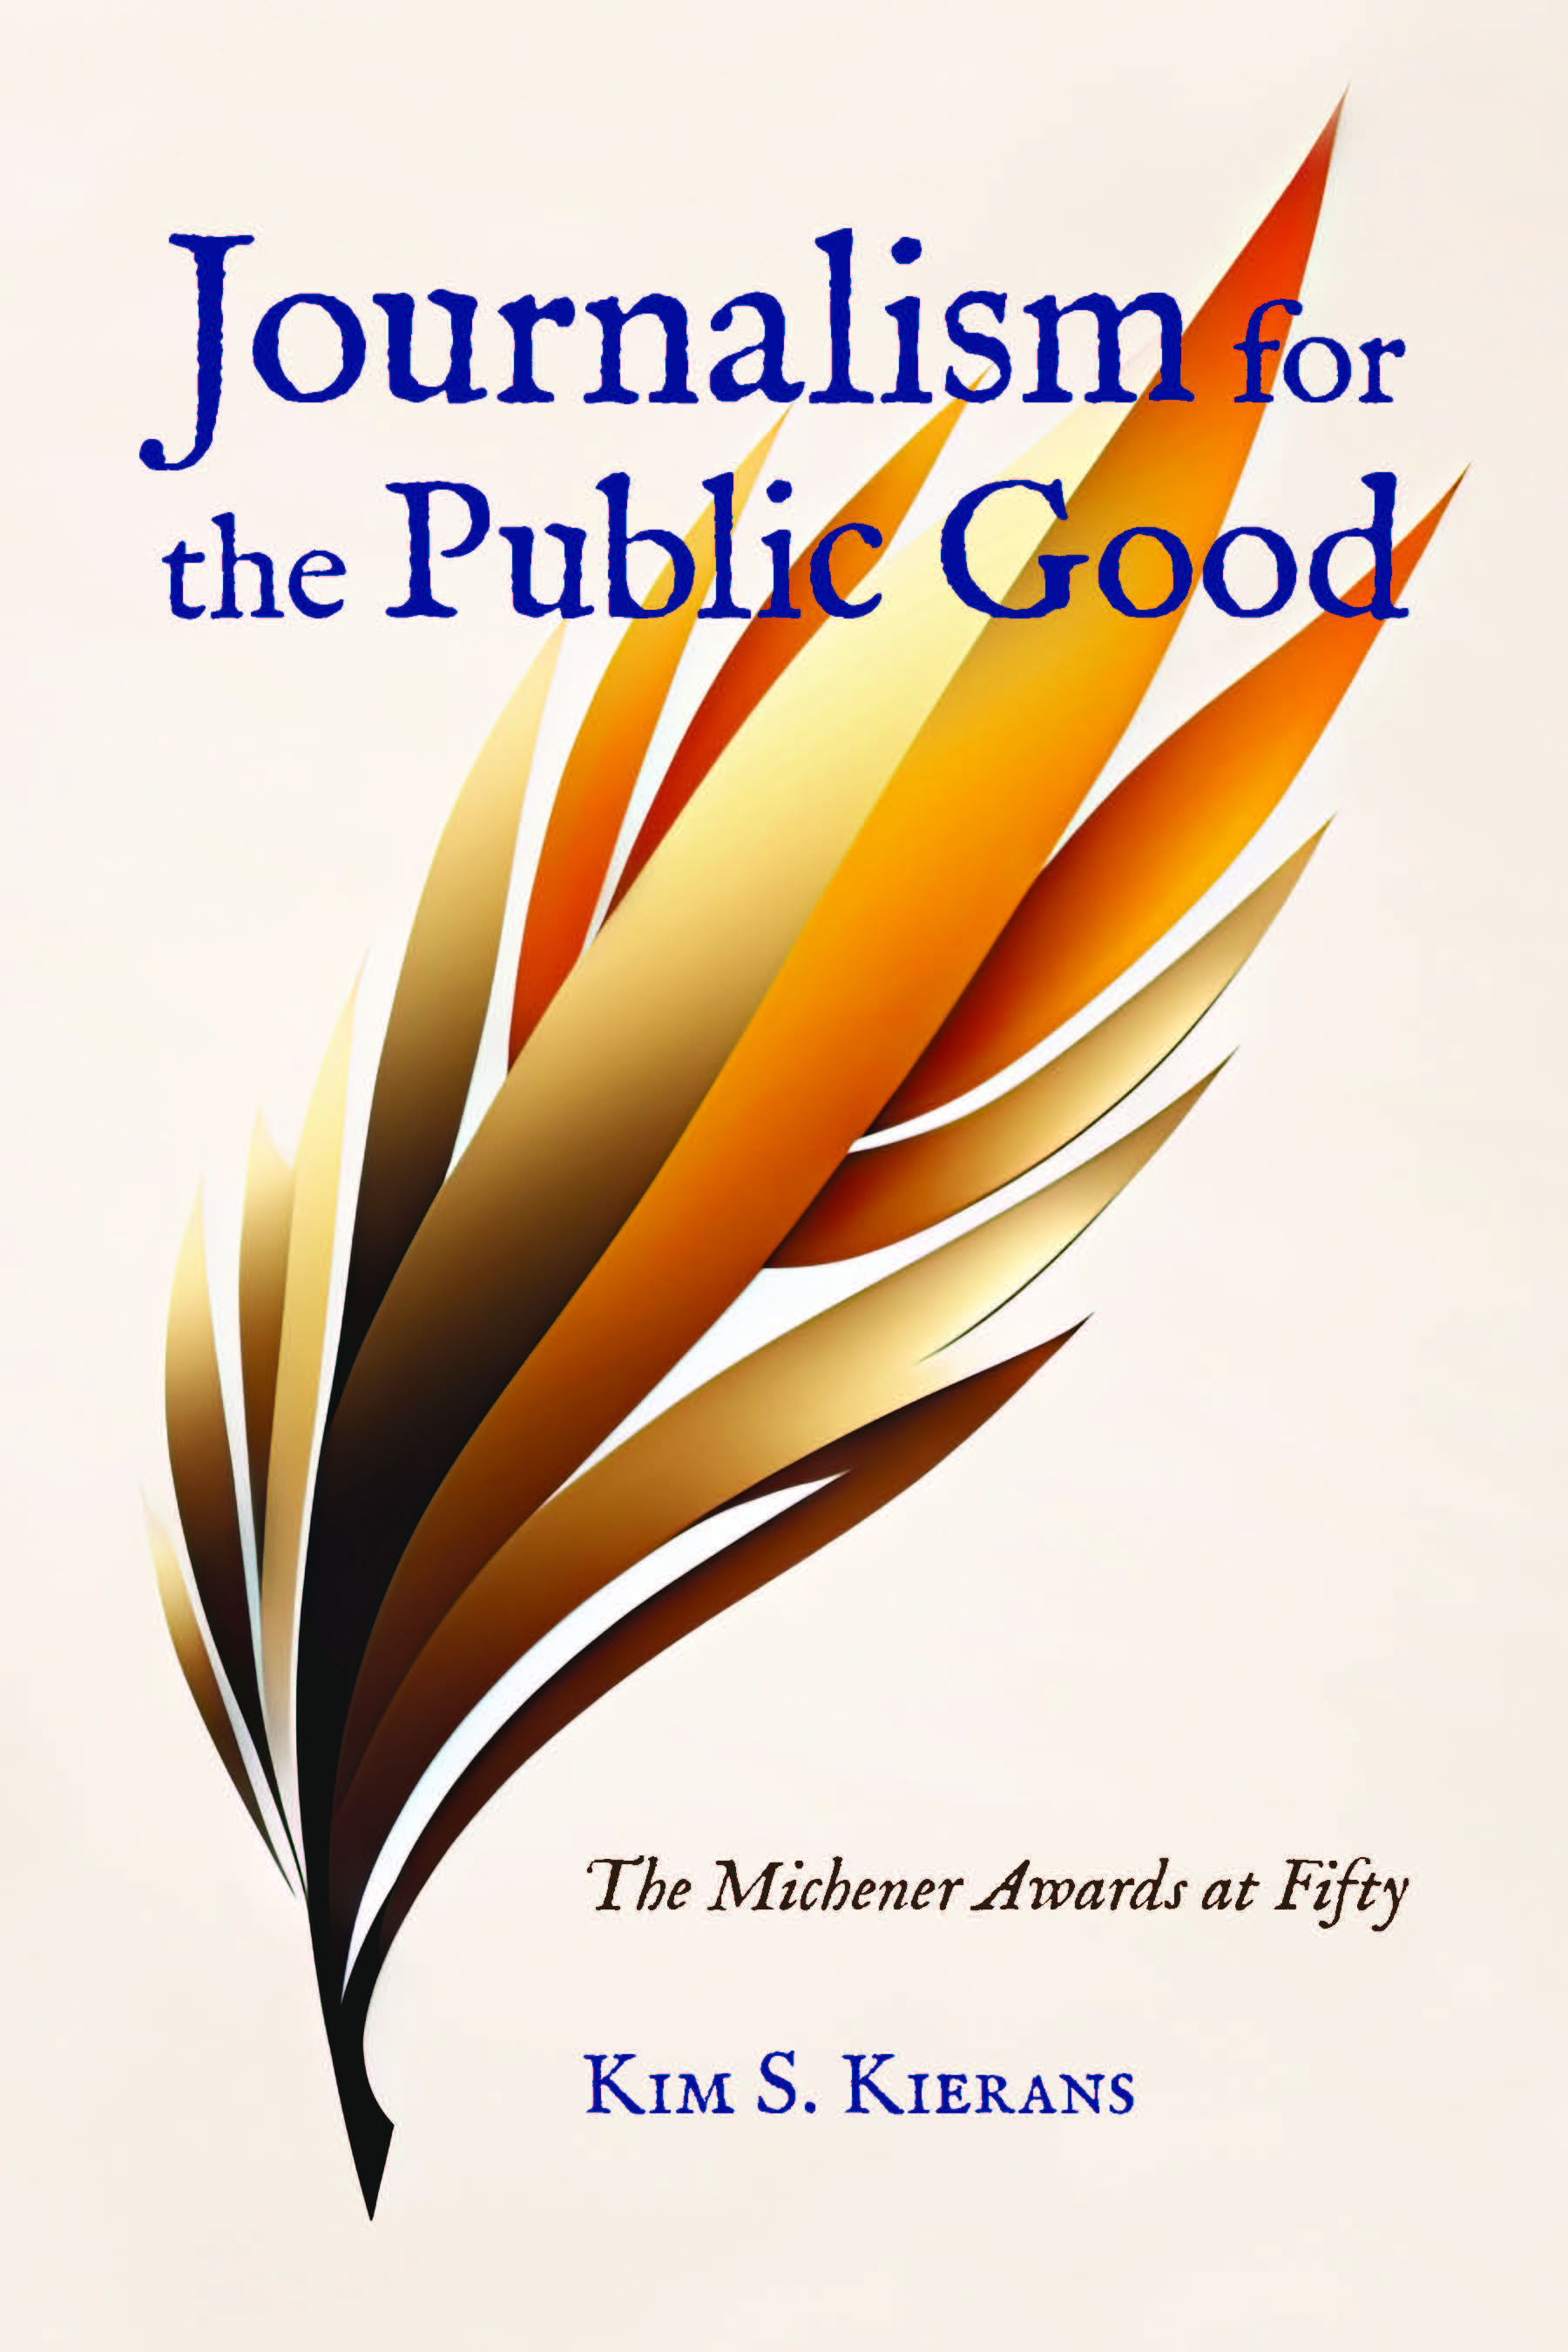 Cover Image for: Journalism for the Public Good